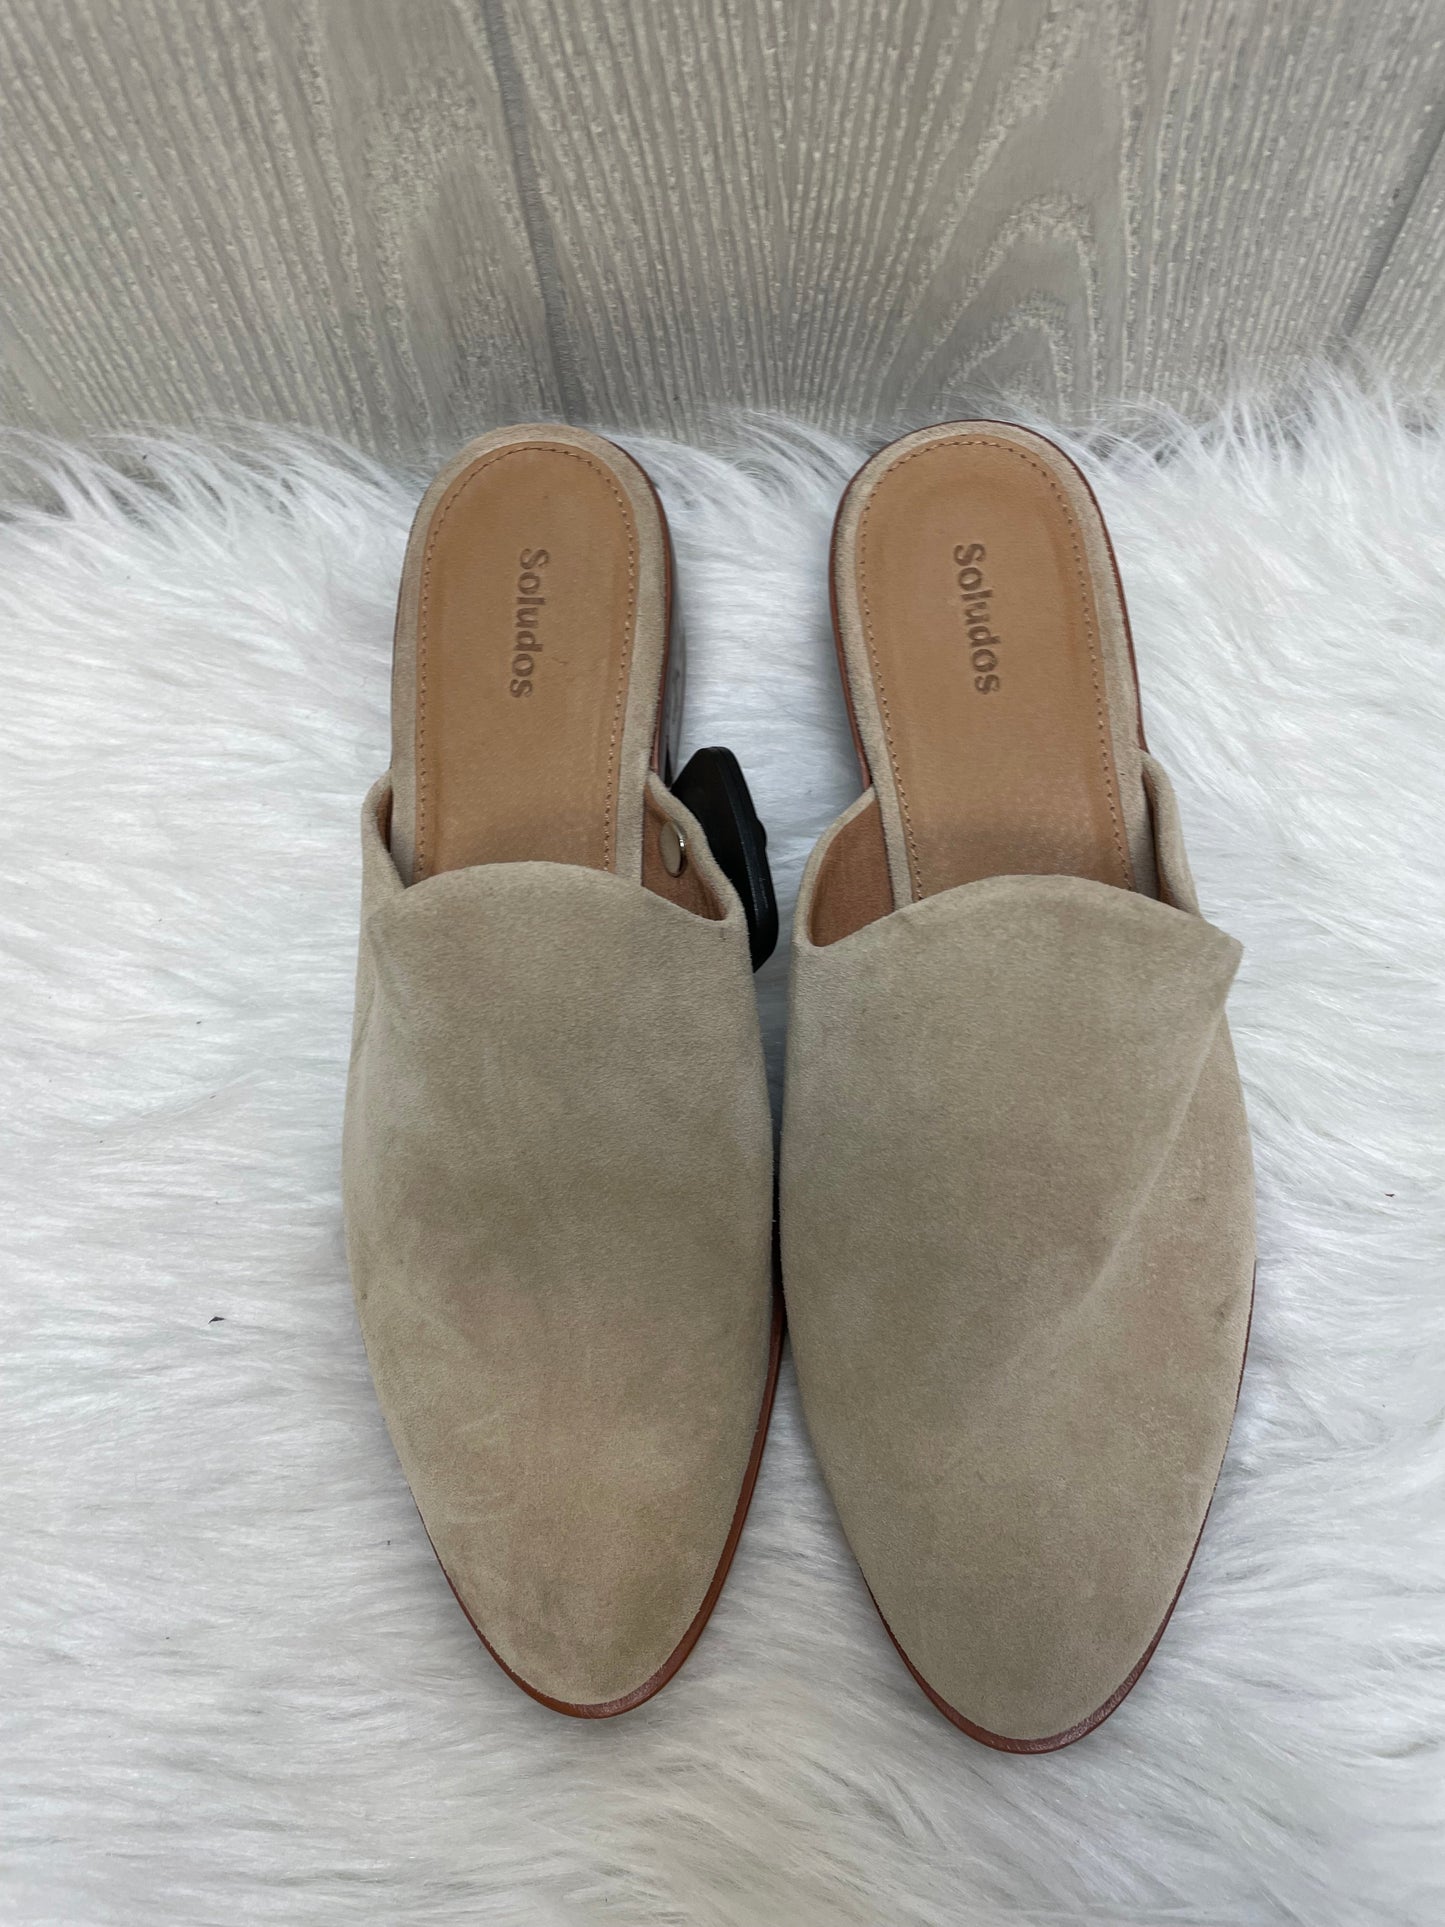 Tan Shoes Flats Soludos, Size 8